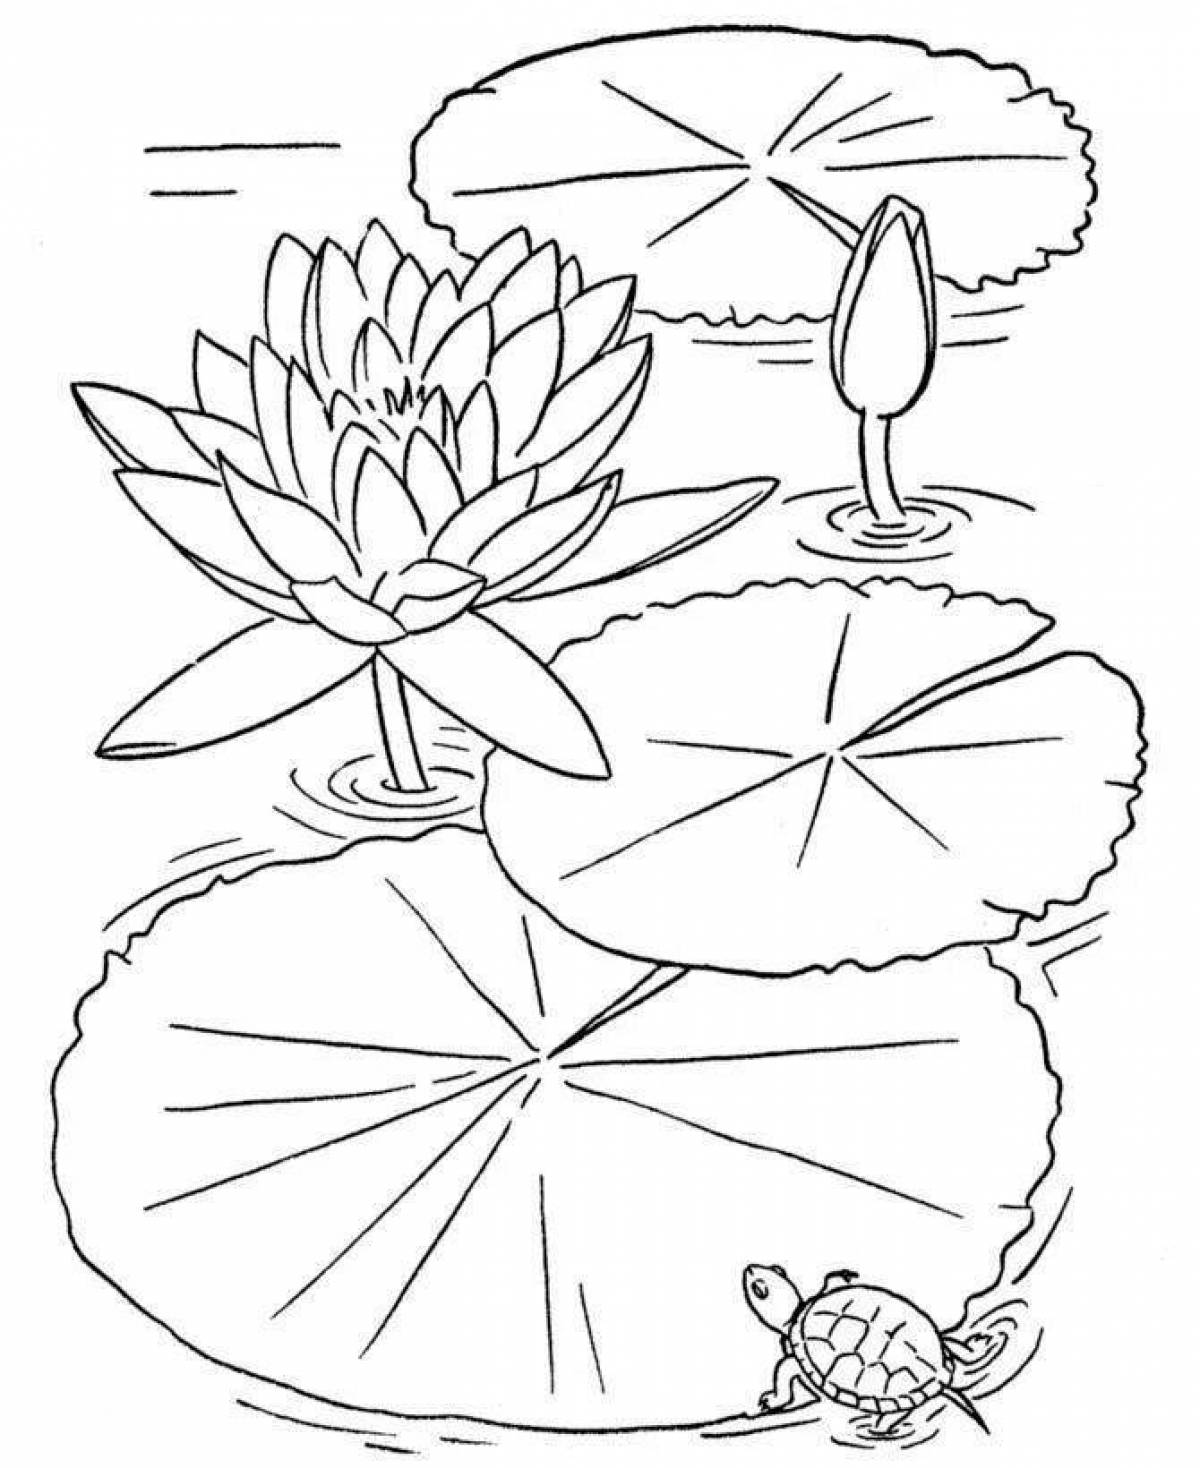 Joyful white water lily coloring book